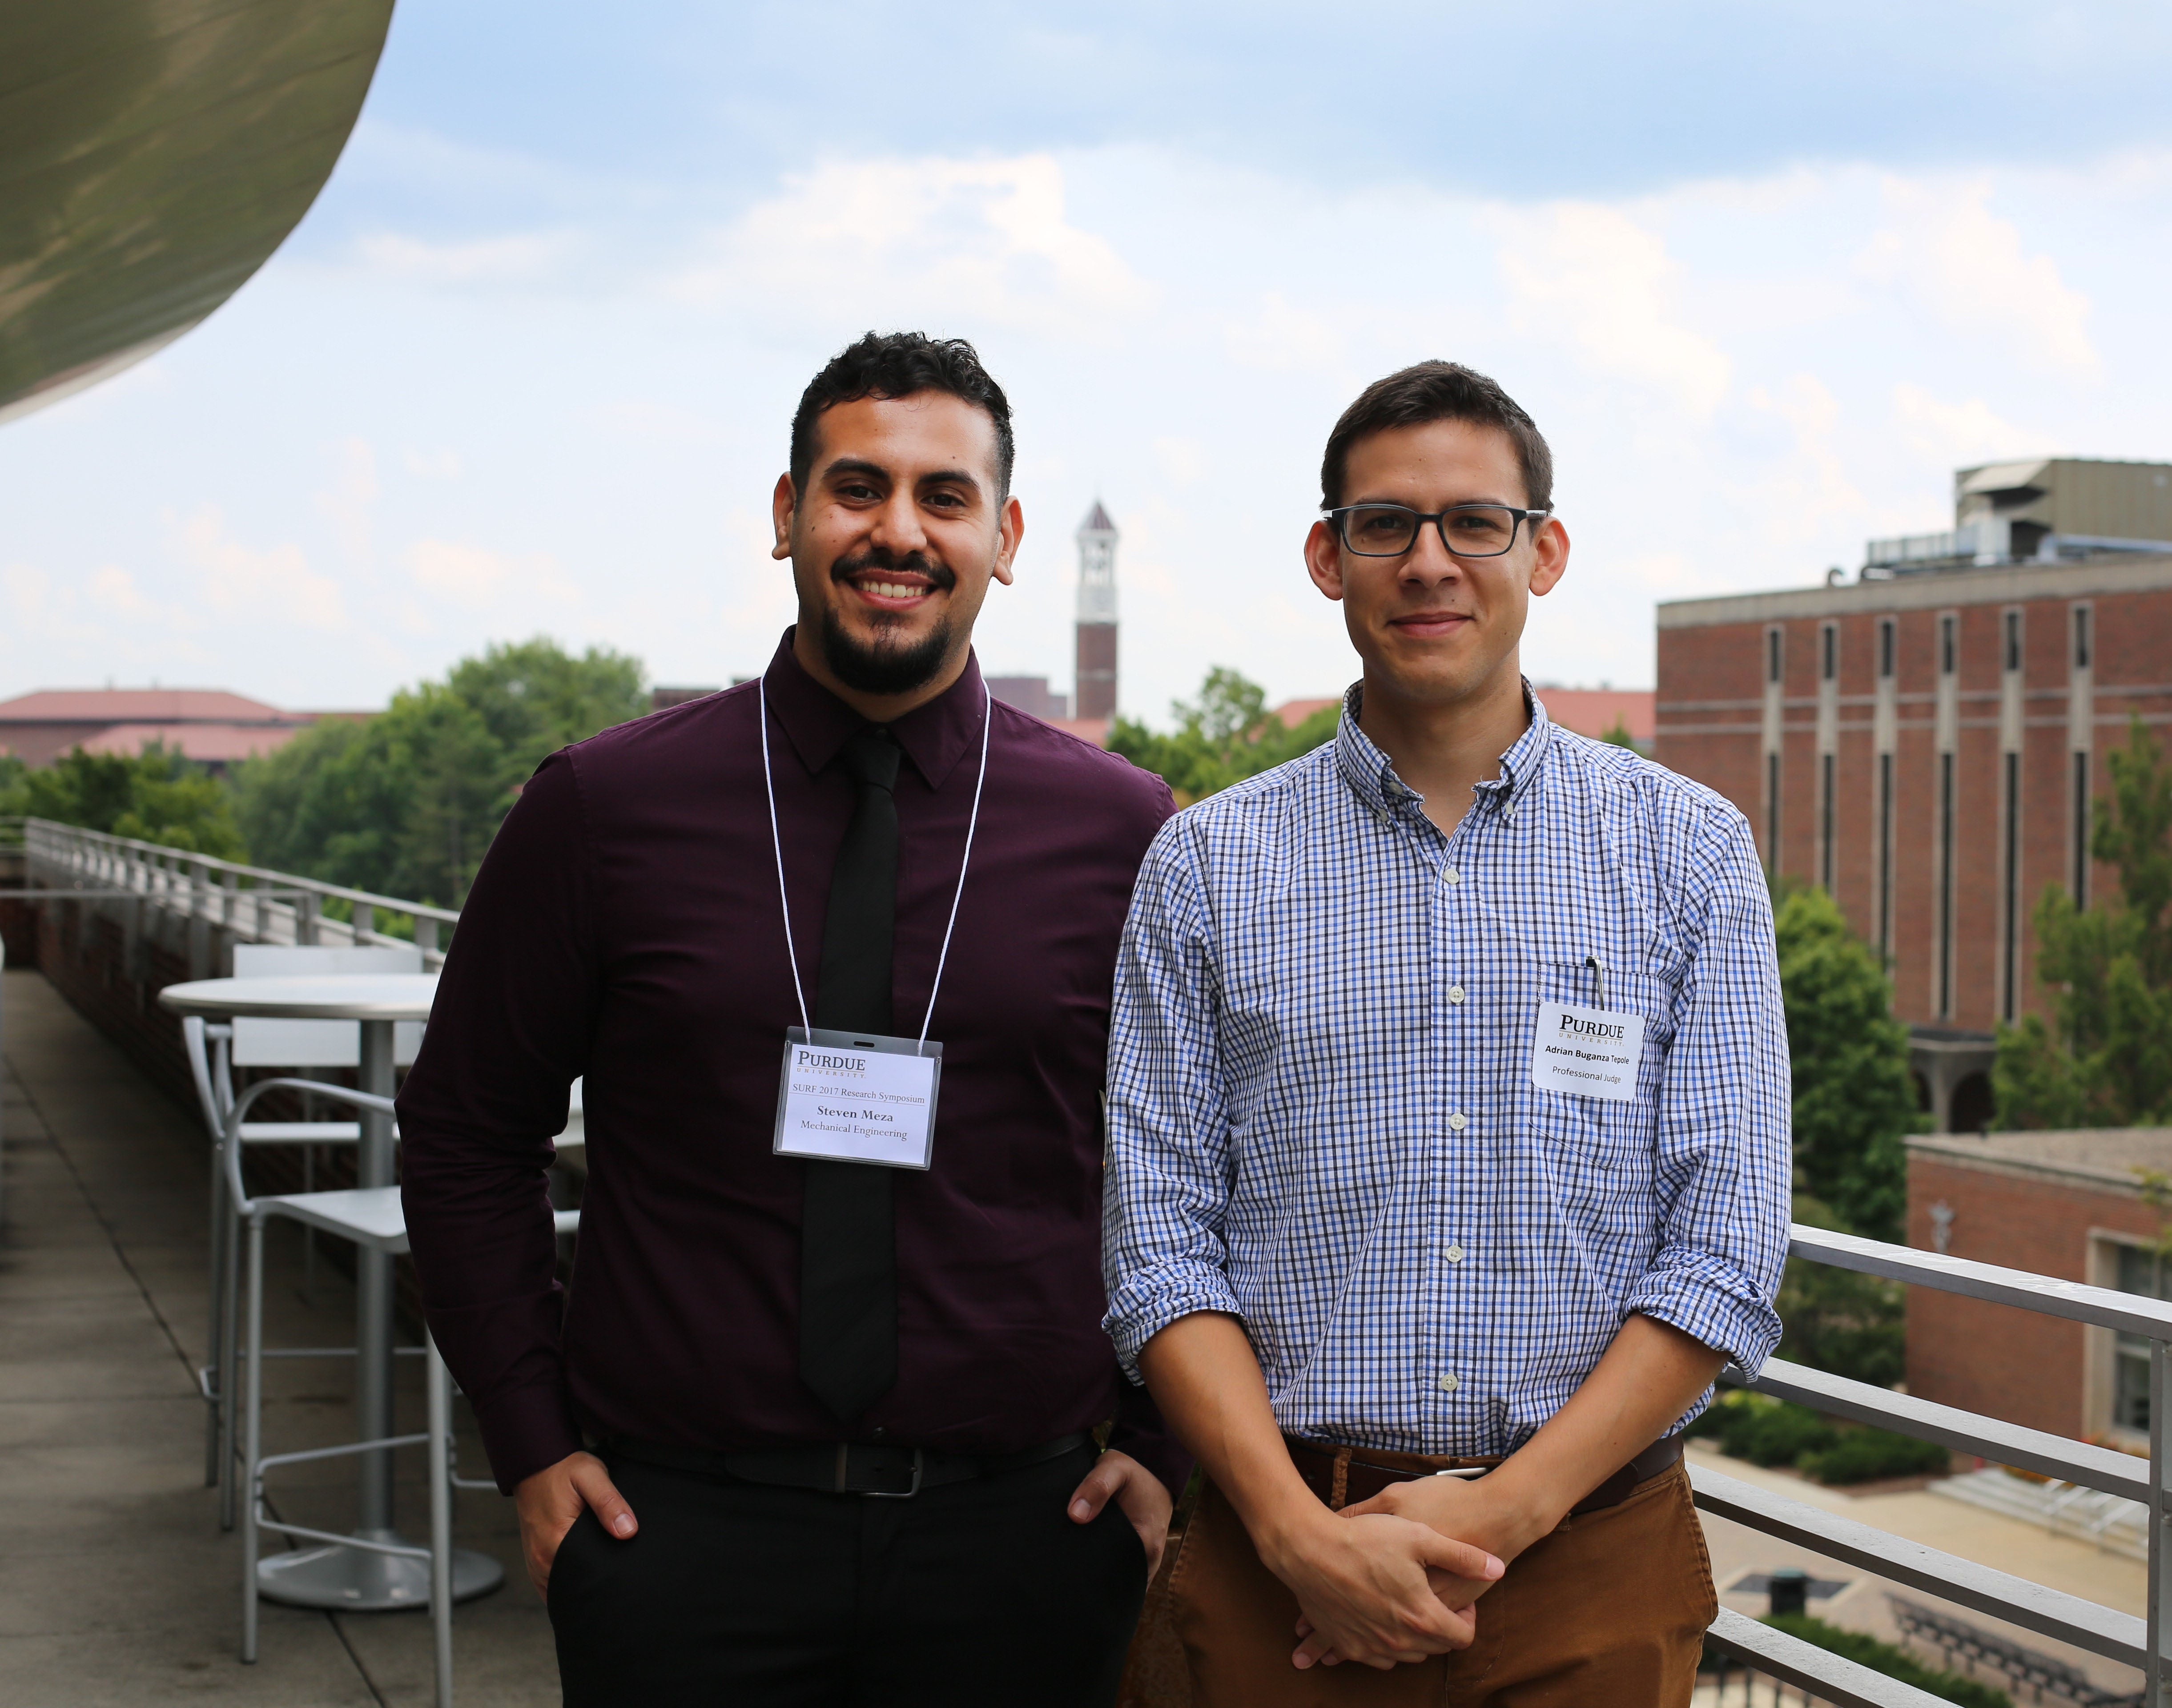 Steven poses with a colleague Adrian on balcony of Purdue Campus